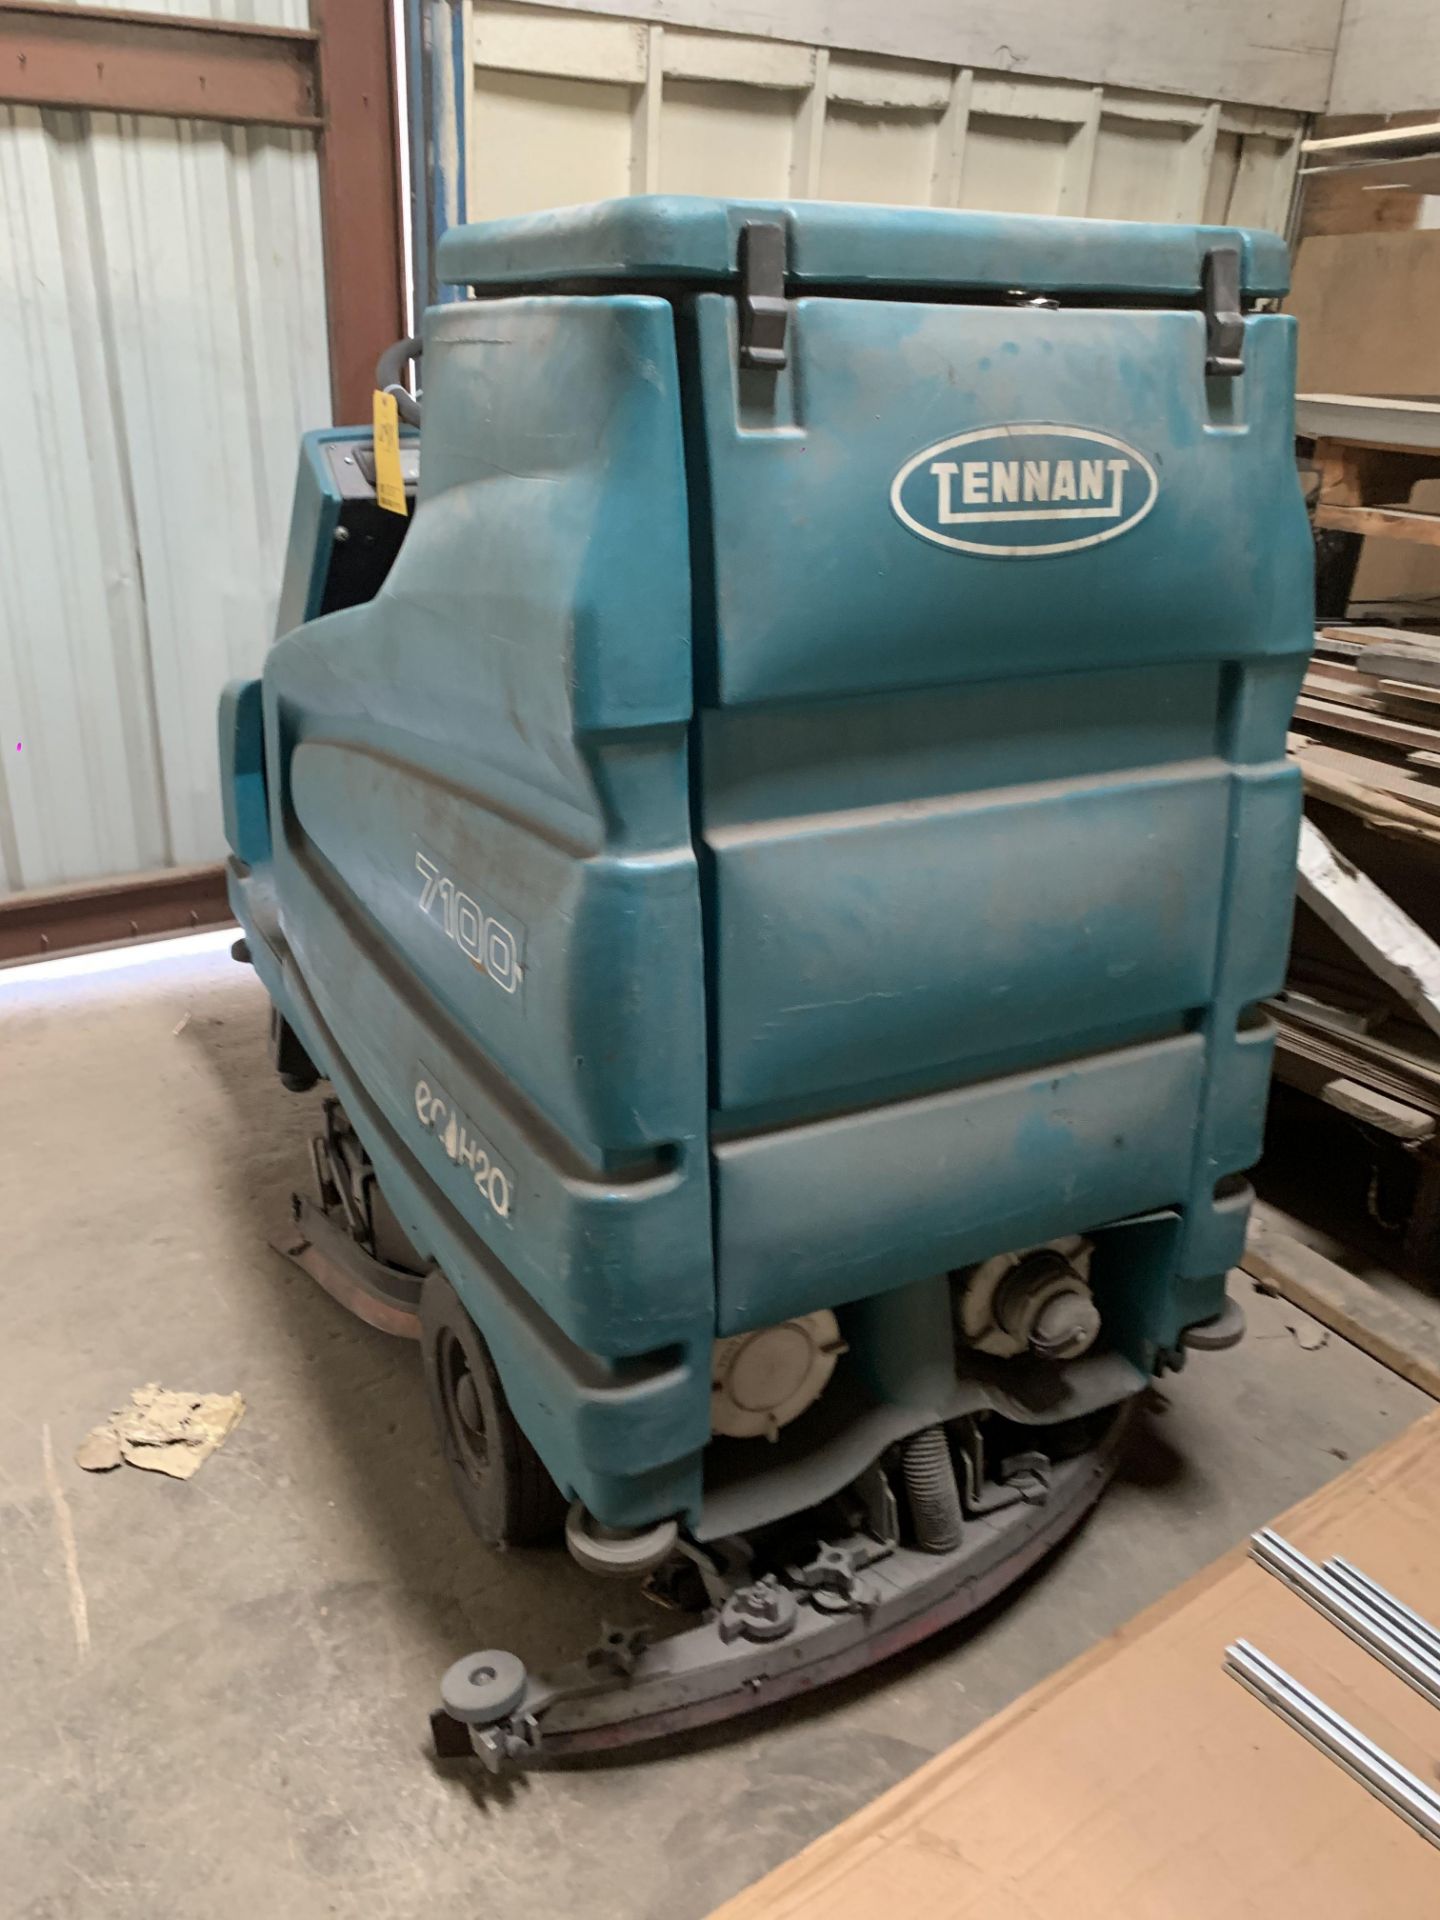 Tennant 7100 Floor Sweeper (LOCATION: 3421 N Sylvania Ave, Ft Worth TX 76111) - Image 2 of 3